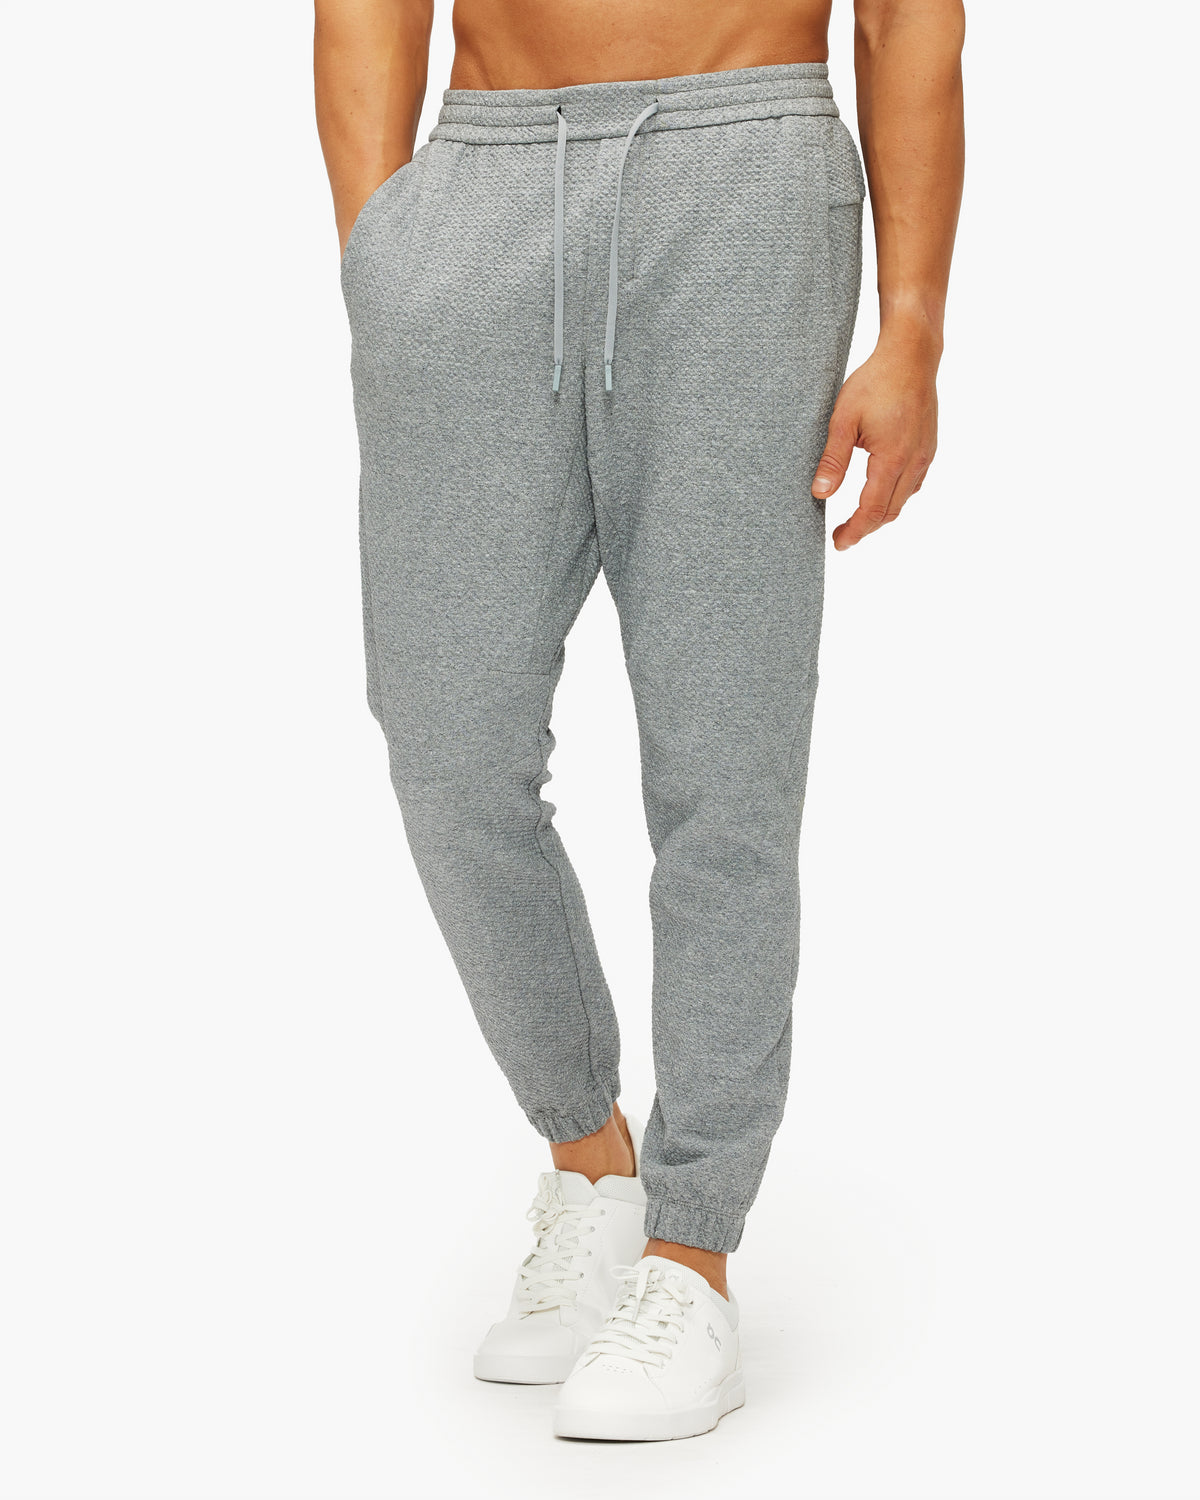 Lululemon Textured Double-Knit Cotton Jogger – The Shop at Equinox